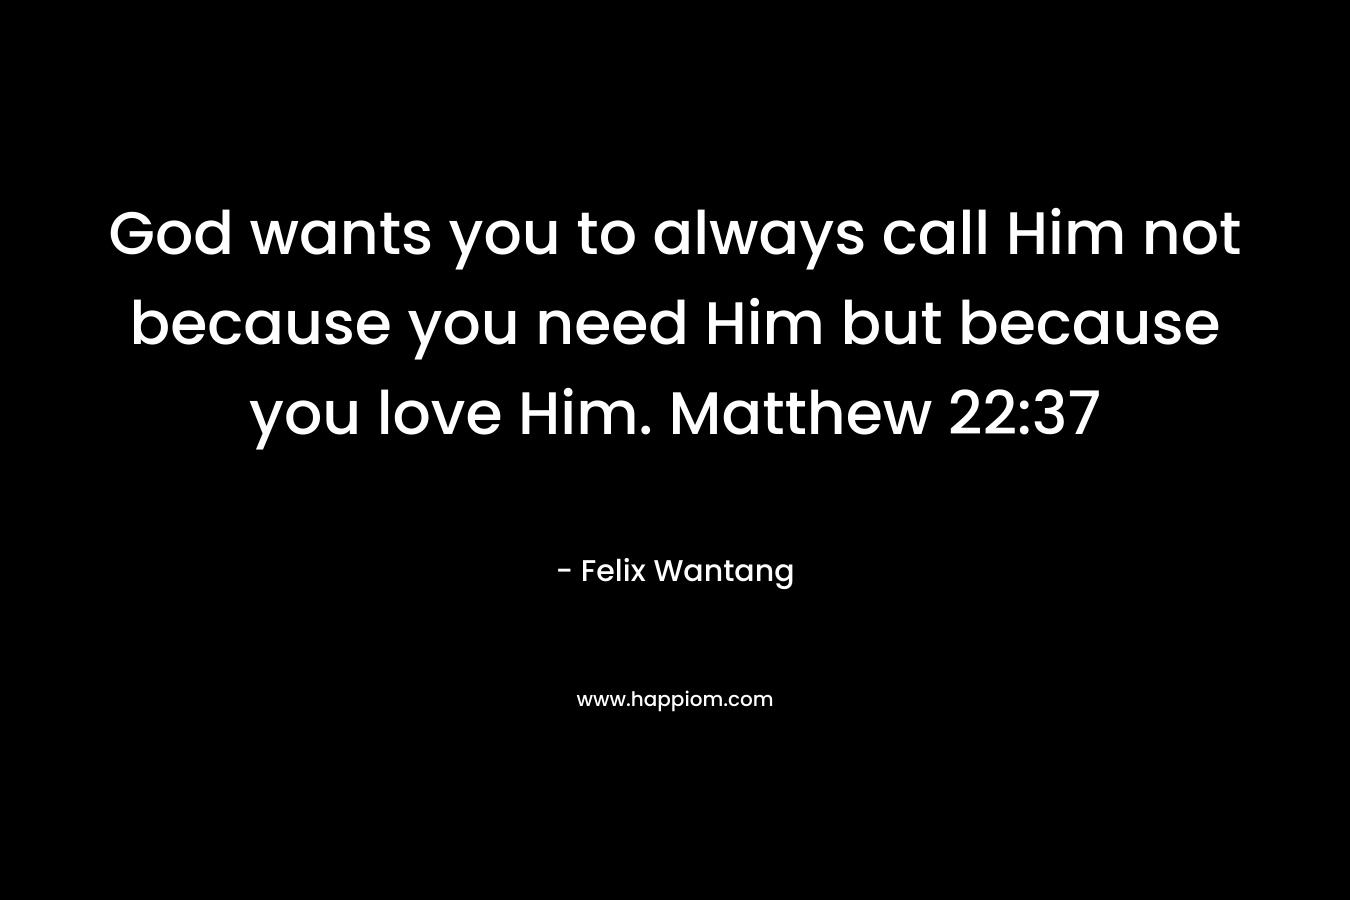 God wants you to always call Him not because you need Him but because you love Him. Matthew 22:37